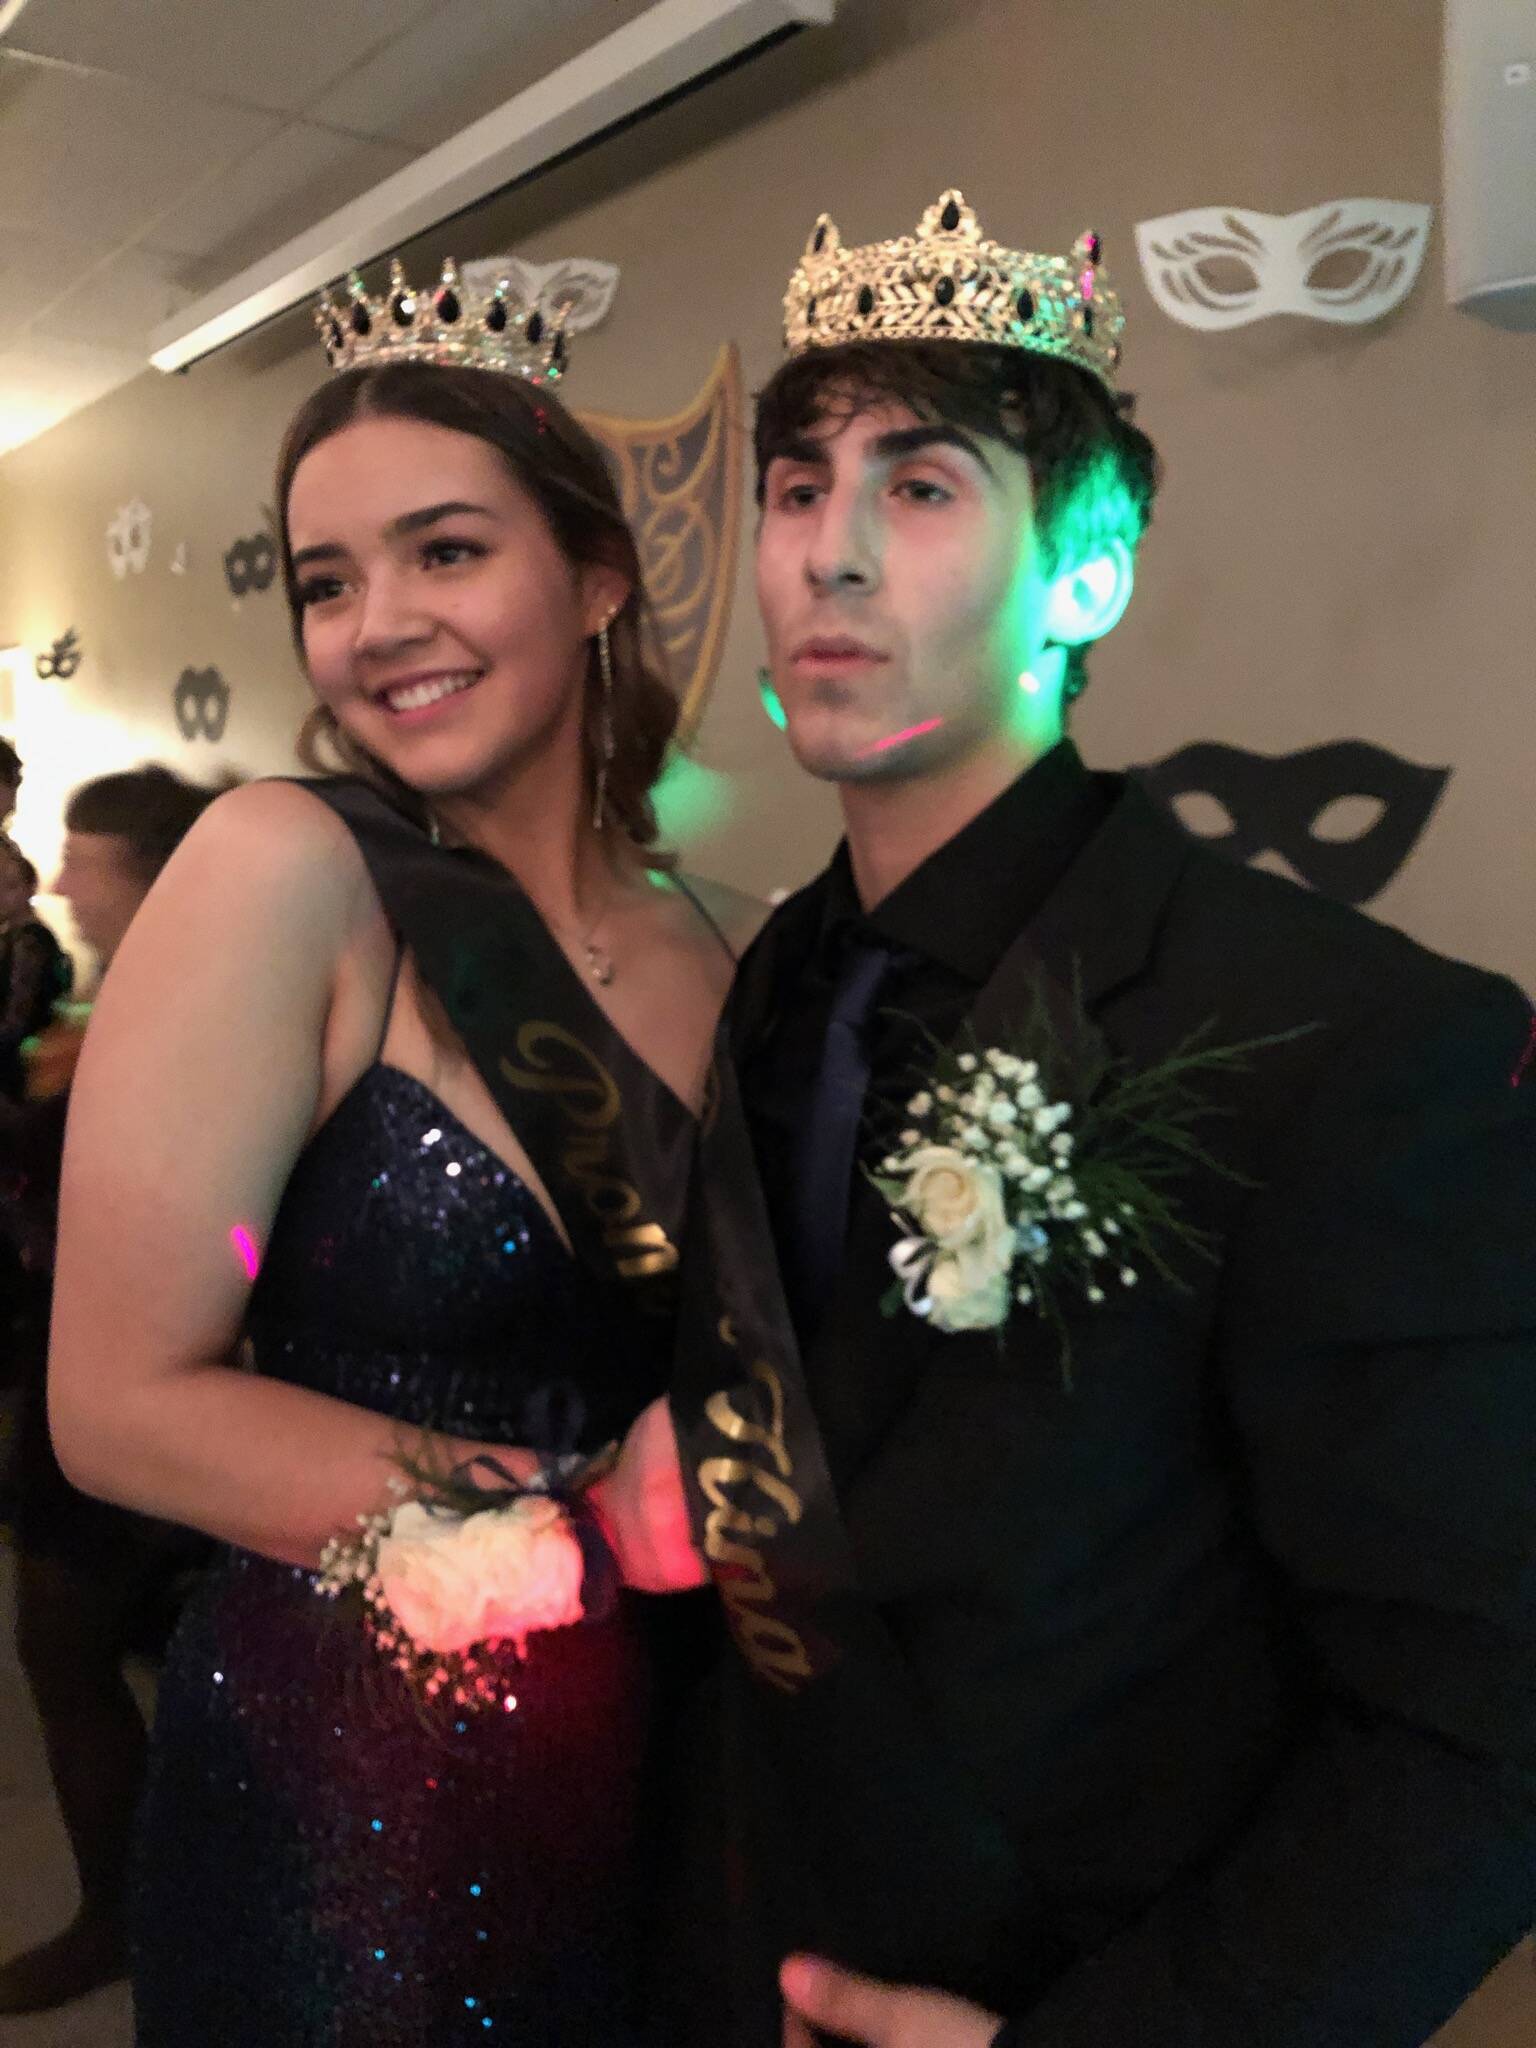 2023 Homer High School prom king and queen, Lars Pleznac and Nevaeh Diaz, on Saturday. (Photo provided by Erin Bregge)